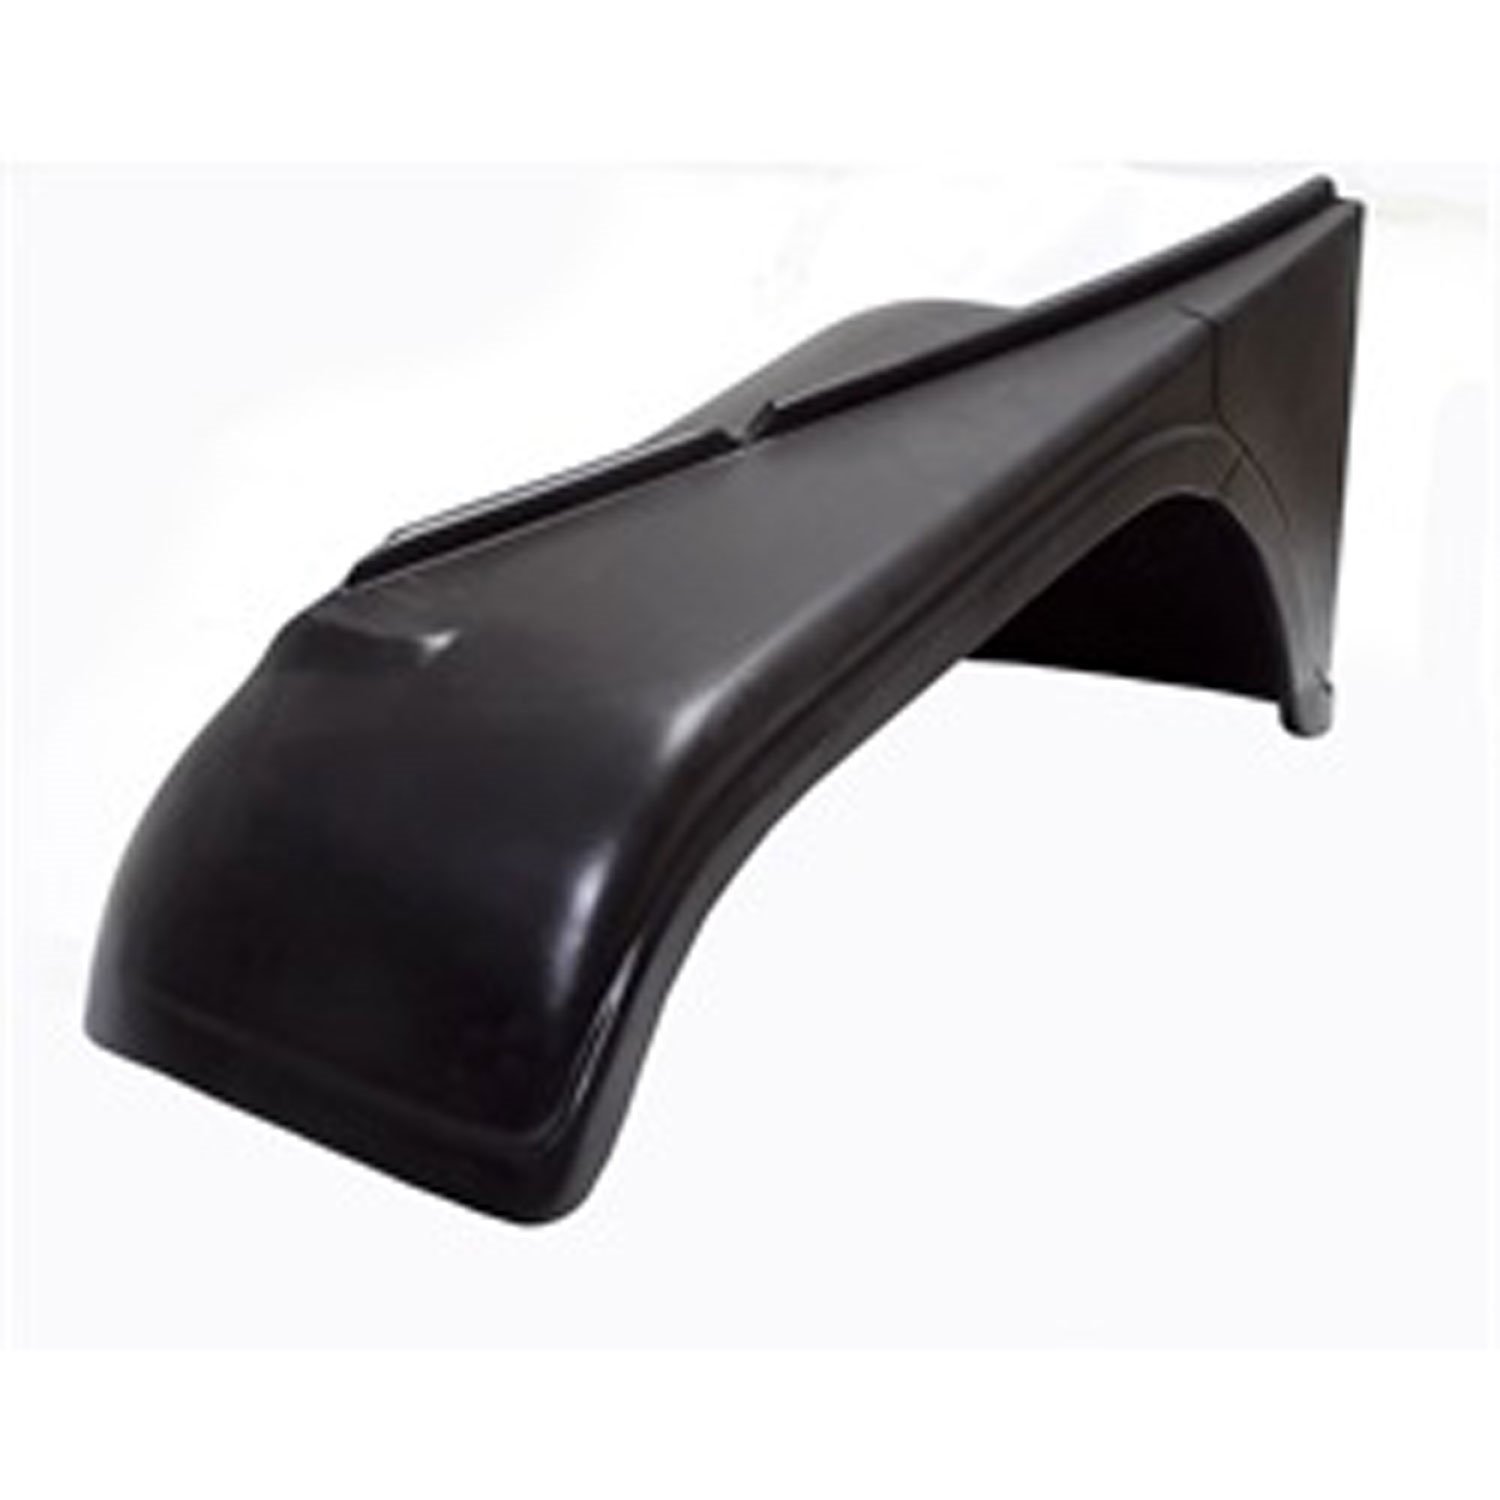 Replacement front fender from Omix-ADA, Fits left side of 52-75 Willys M38-A1 55-75 Jeep CJ5